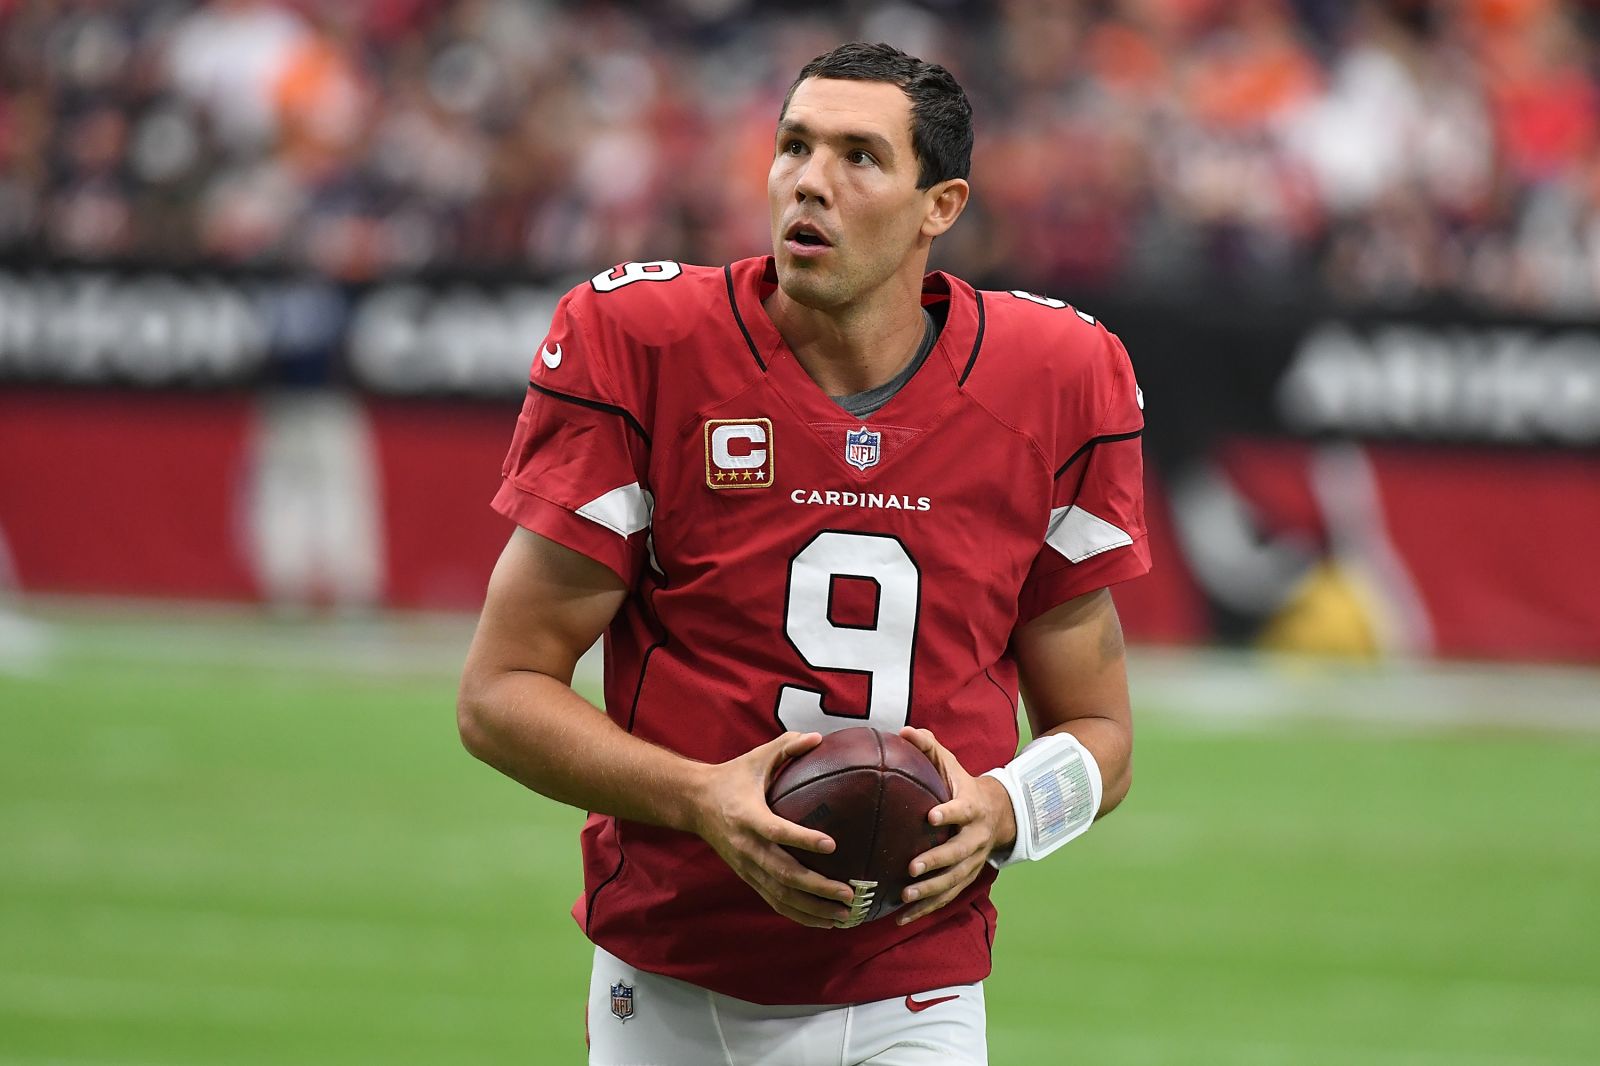 Sam Bradford holding the ball in Cardinals jersey, on-field of NFL